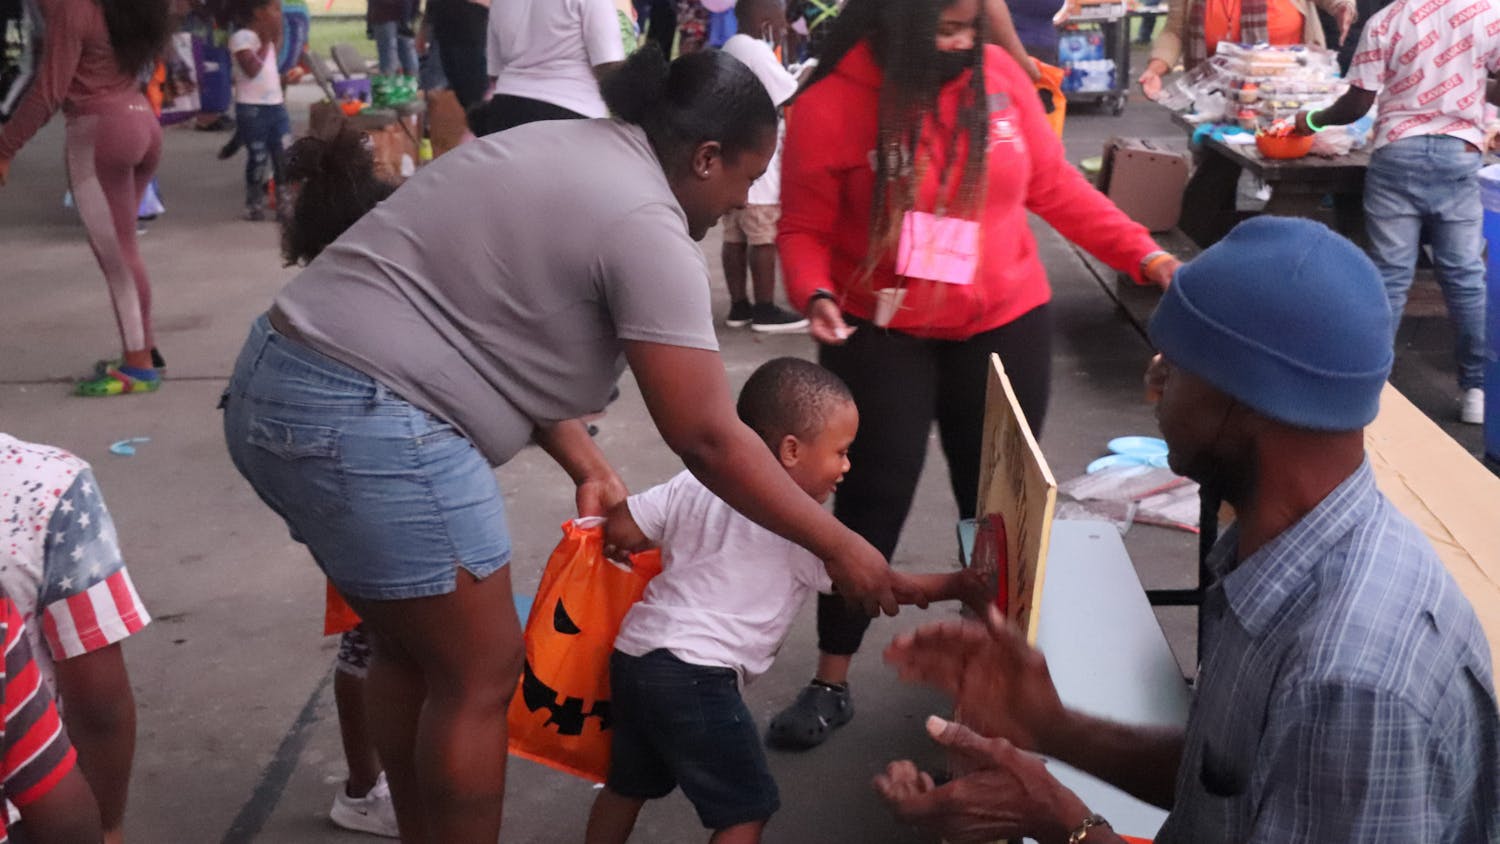 Kids play games during Youth Night and Community Fall Festival at Duval Early Learning Academy on Thursday, Oct. 28, 2021. The festival was meant to bring children together with rising gun violence among youth.